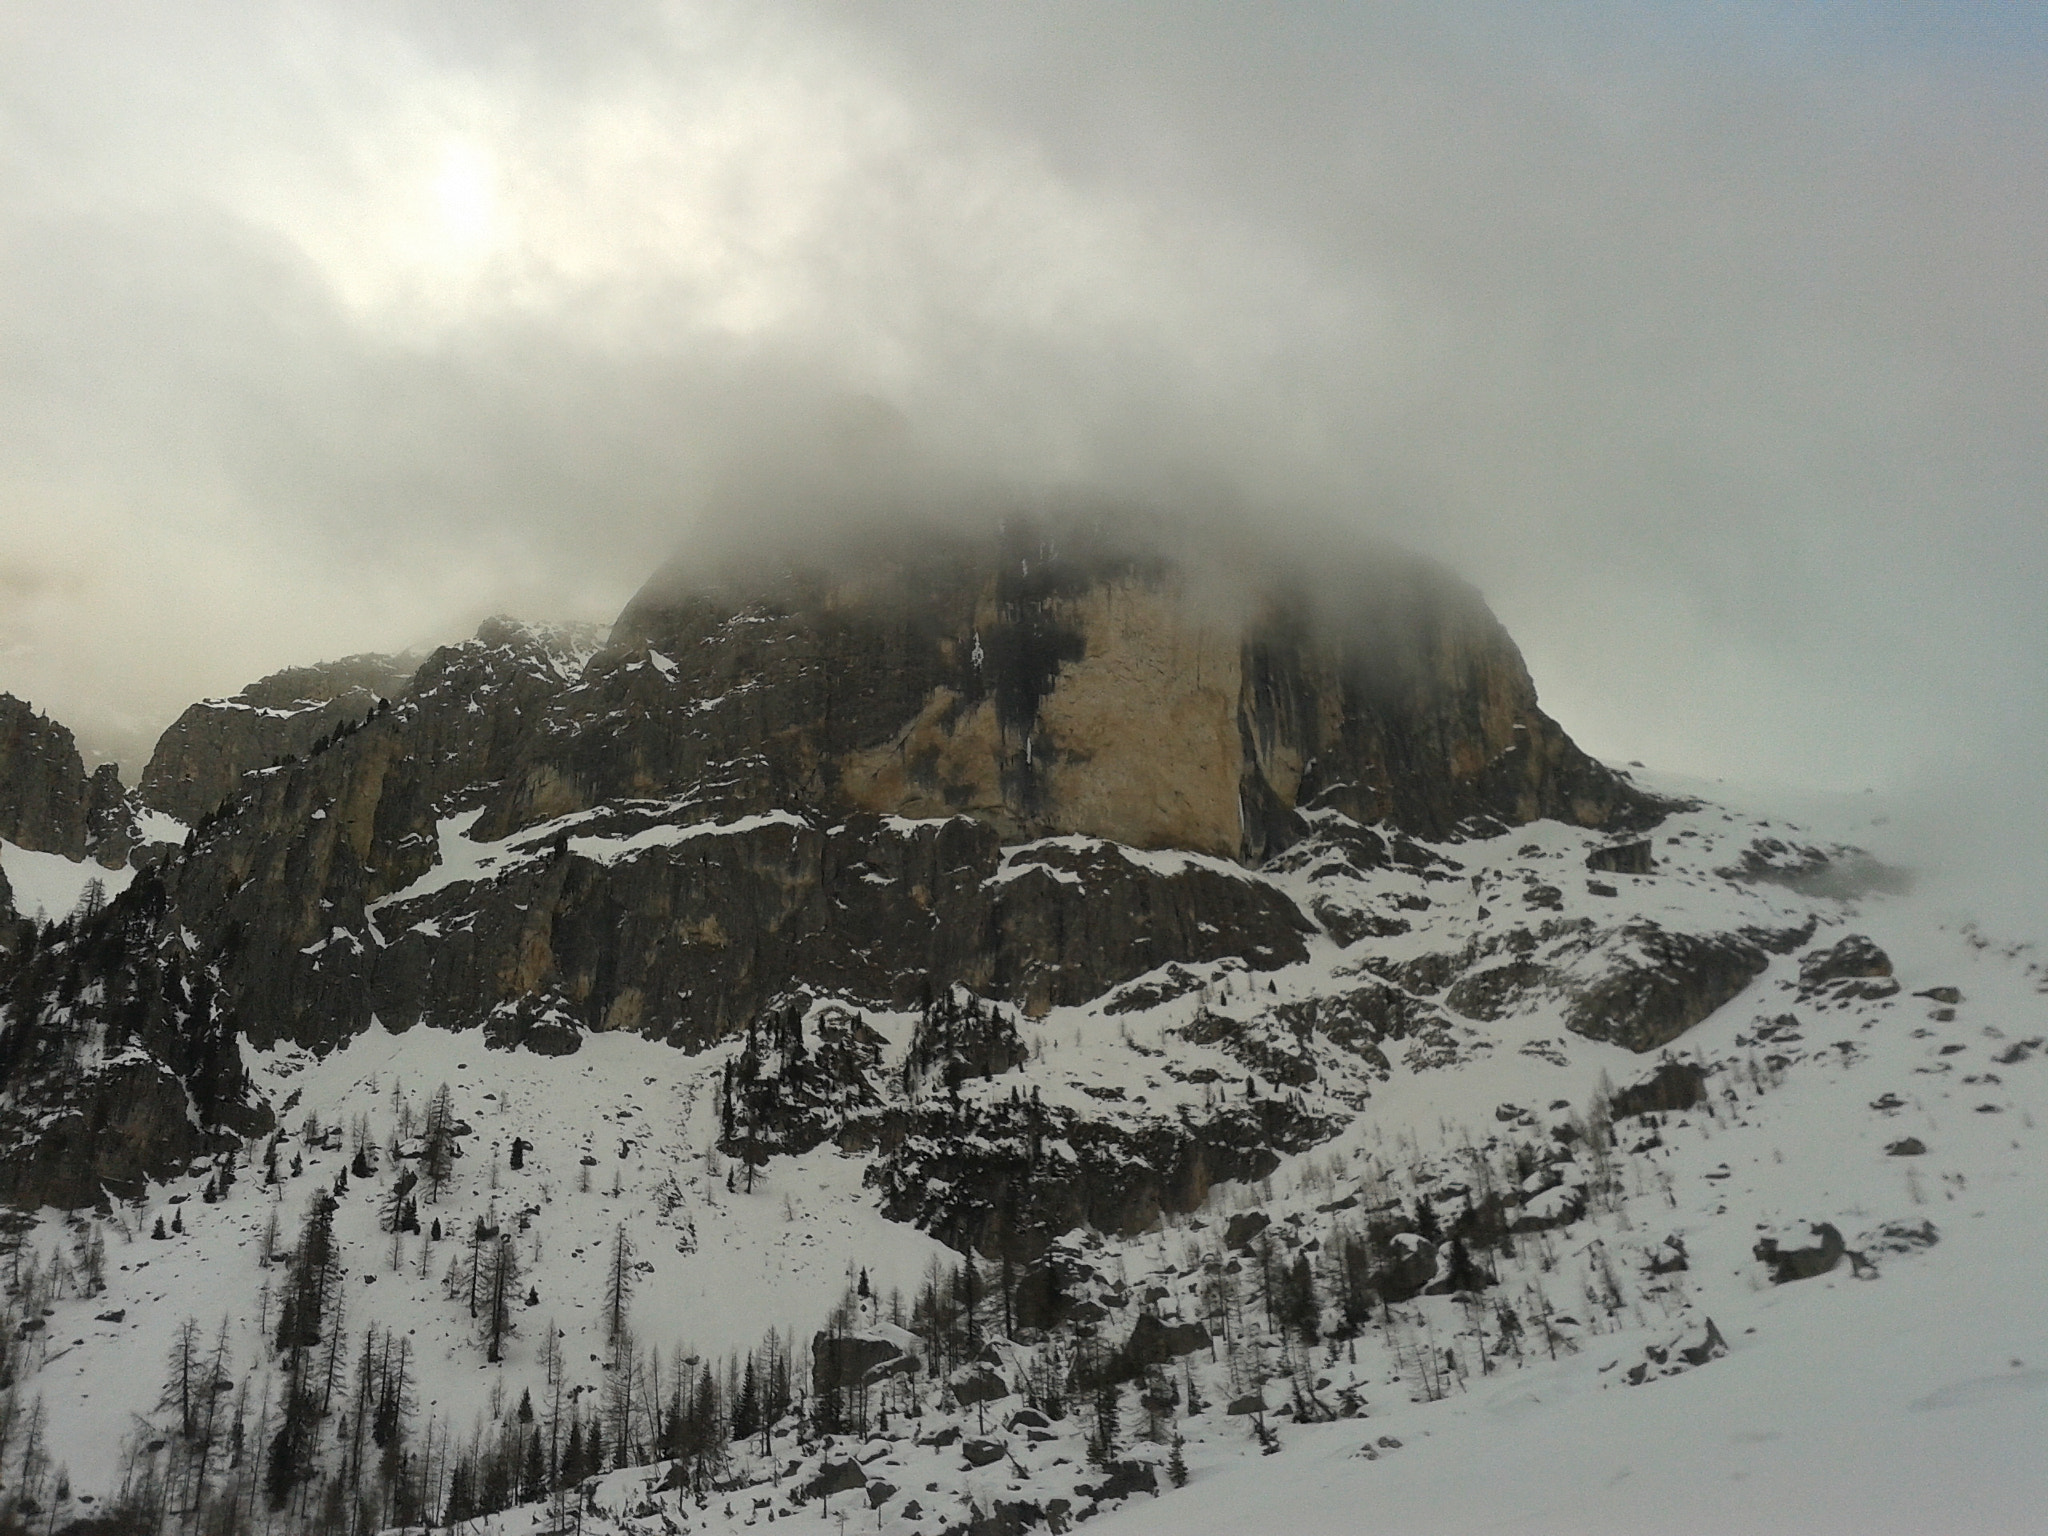 Samsung Galaxy S Advance sample photo. Val venegia, passo rolle, italy photography